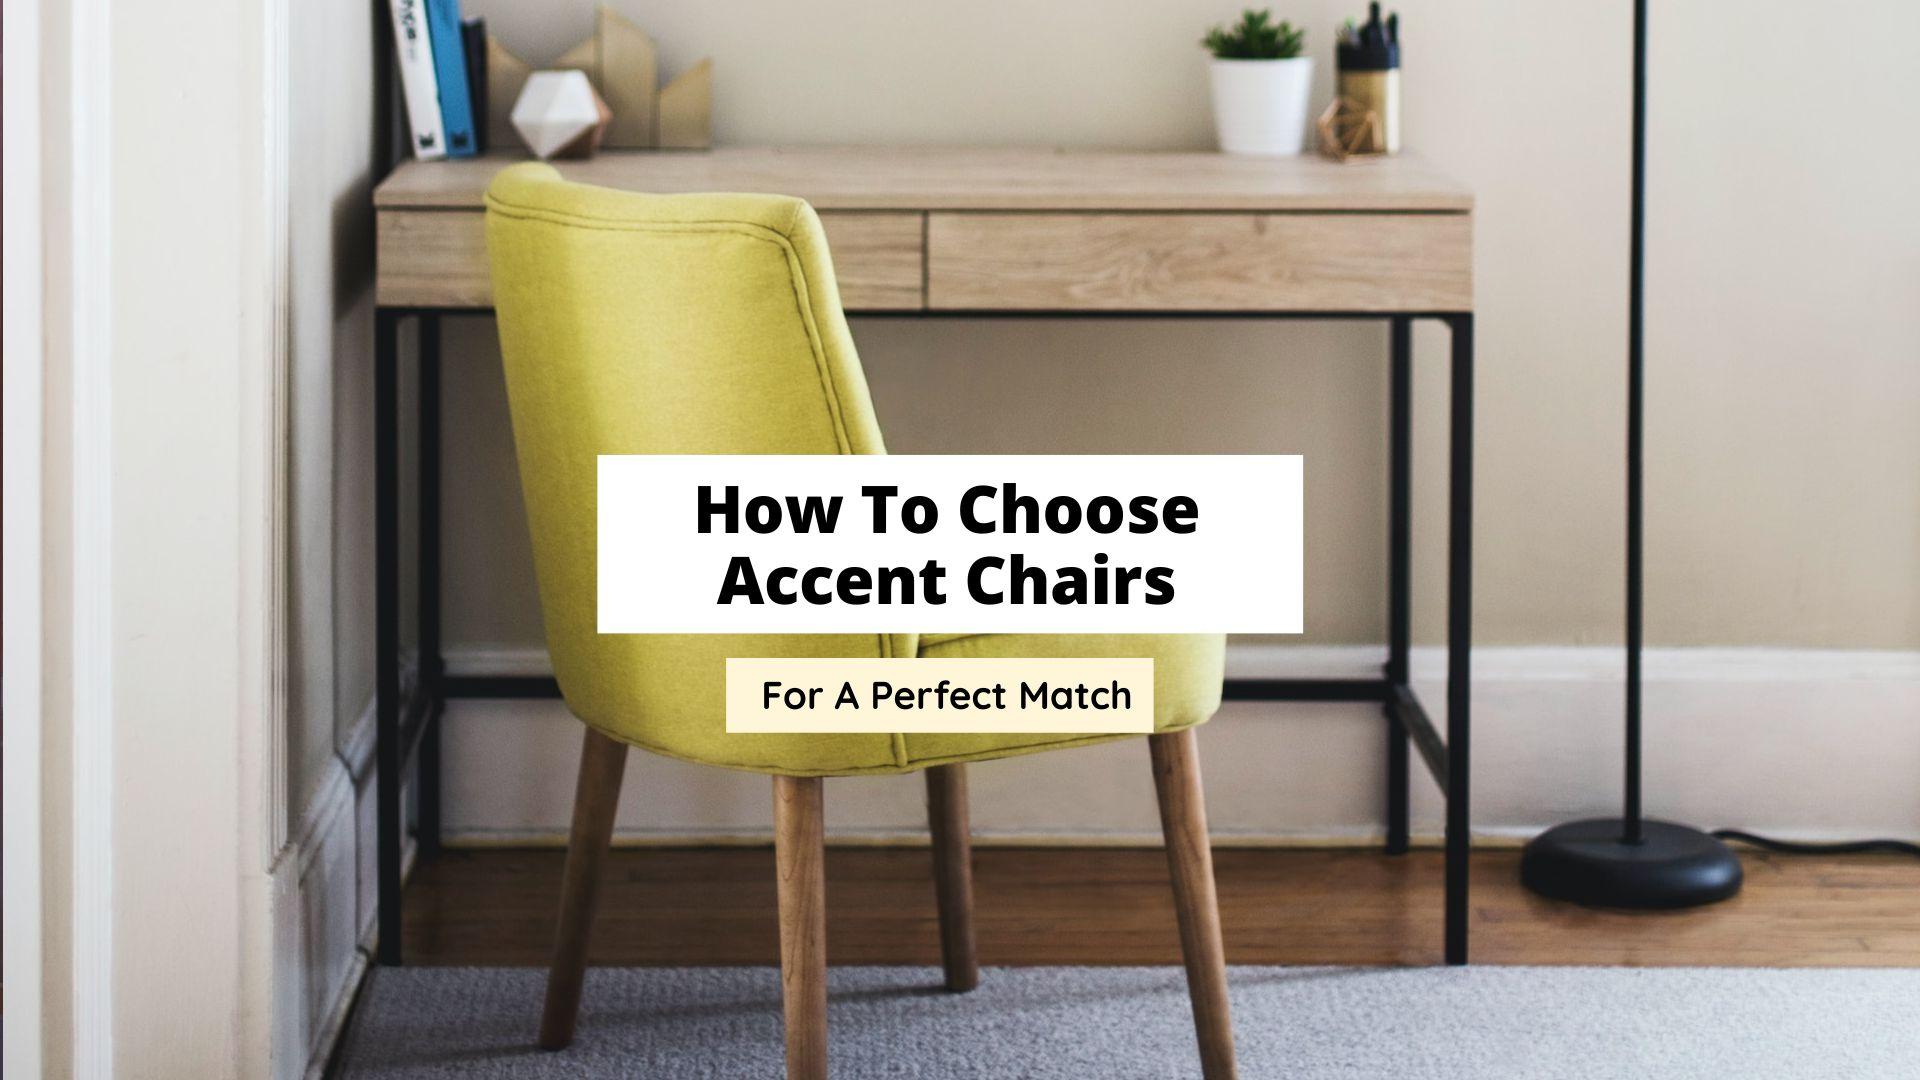 How To Choose Accent Chairs